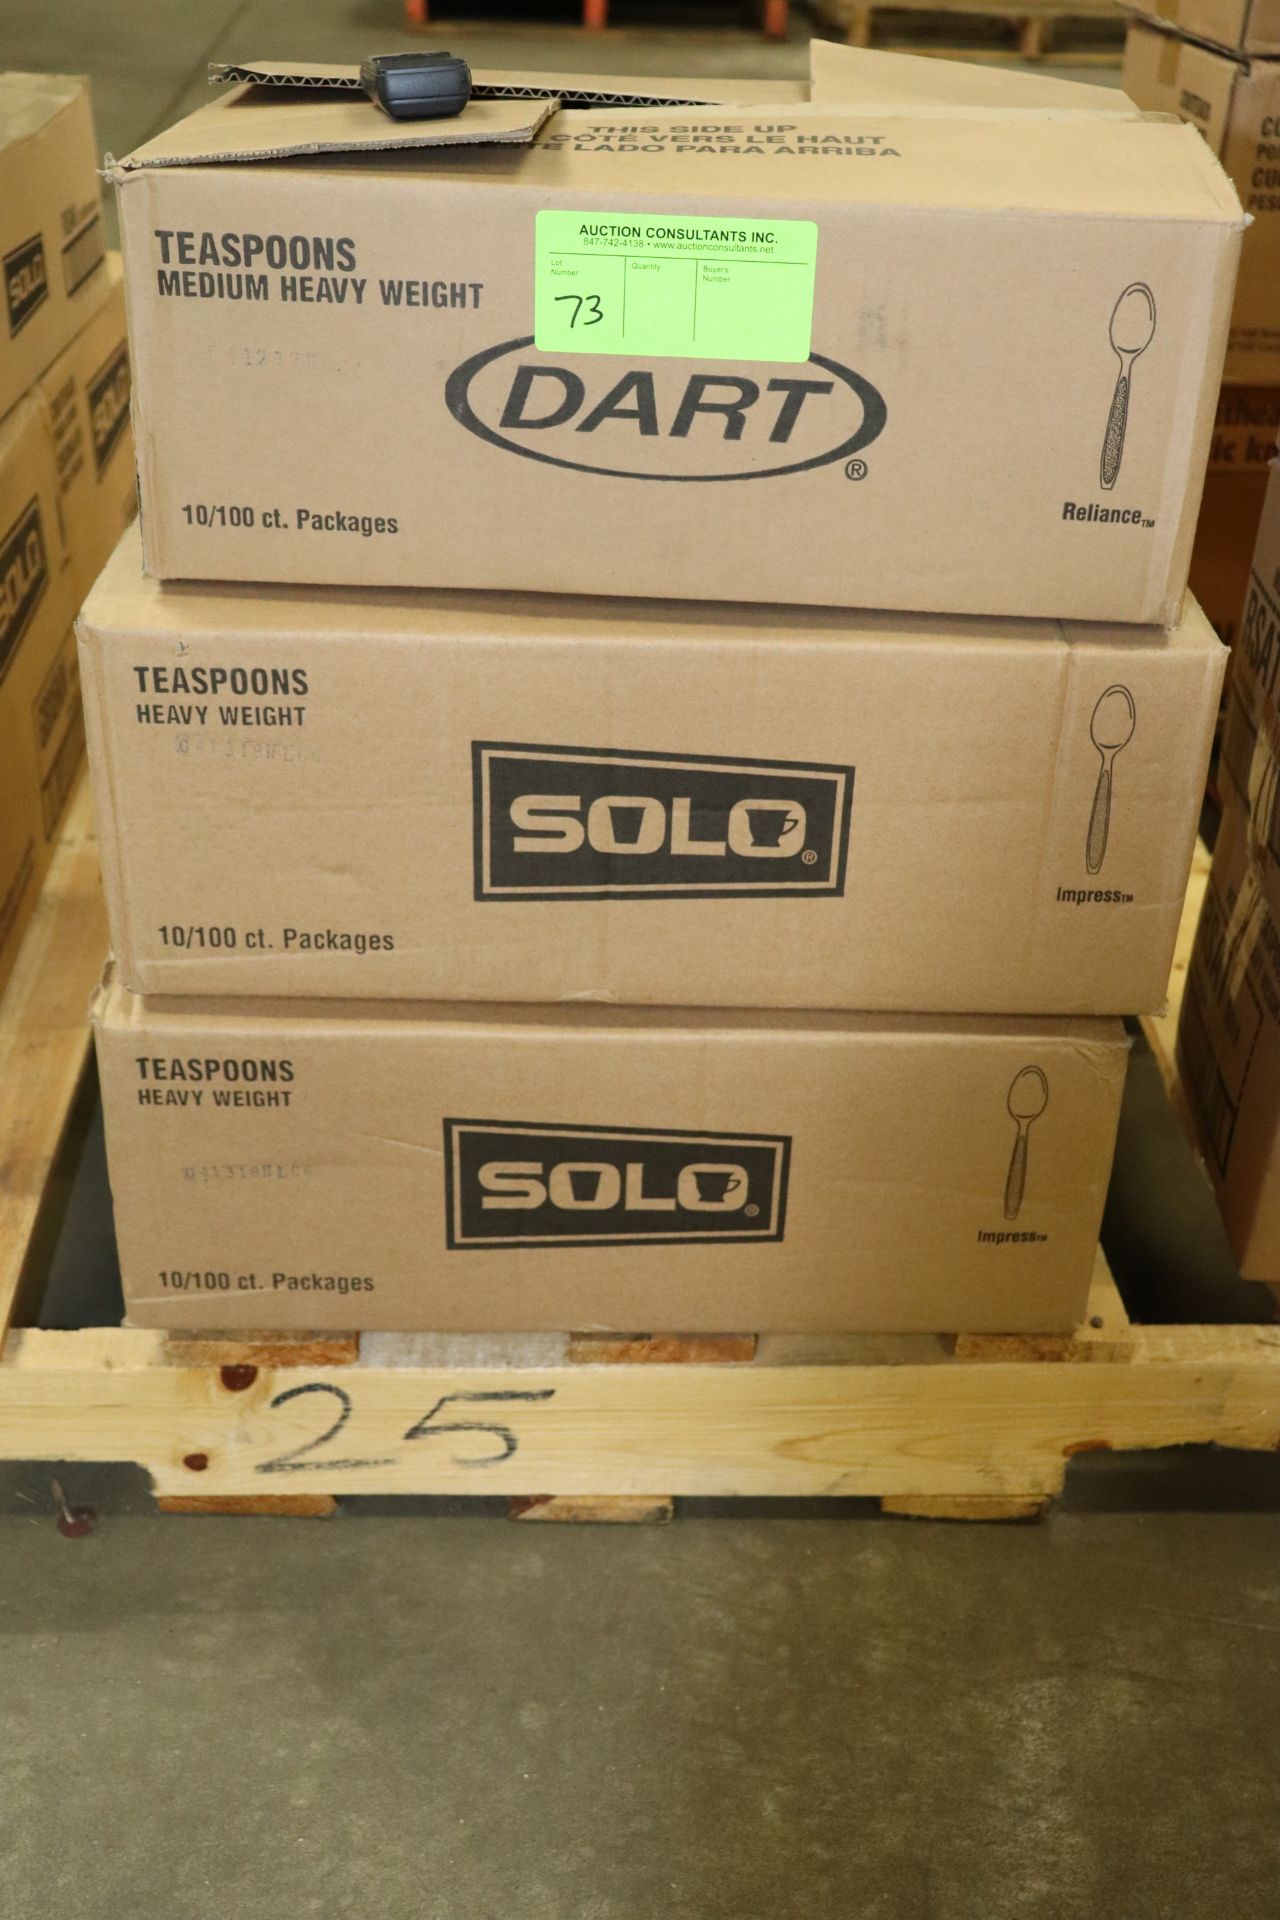 Two full boxes and one partial box of plastic spoons, Solo and Dart brand,